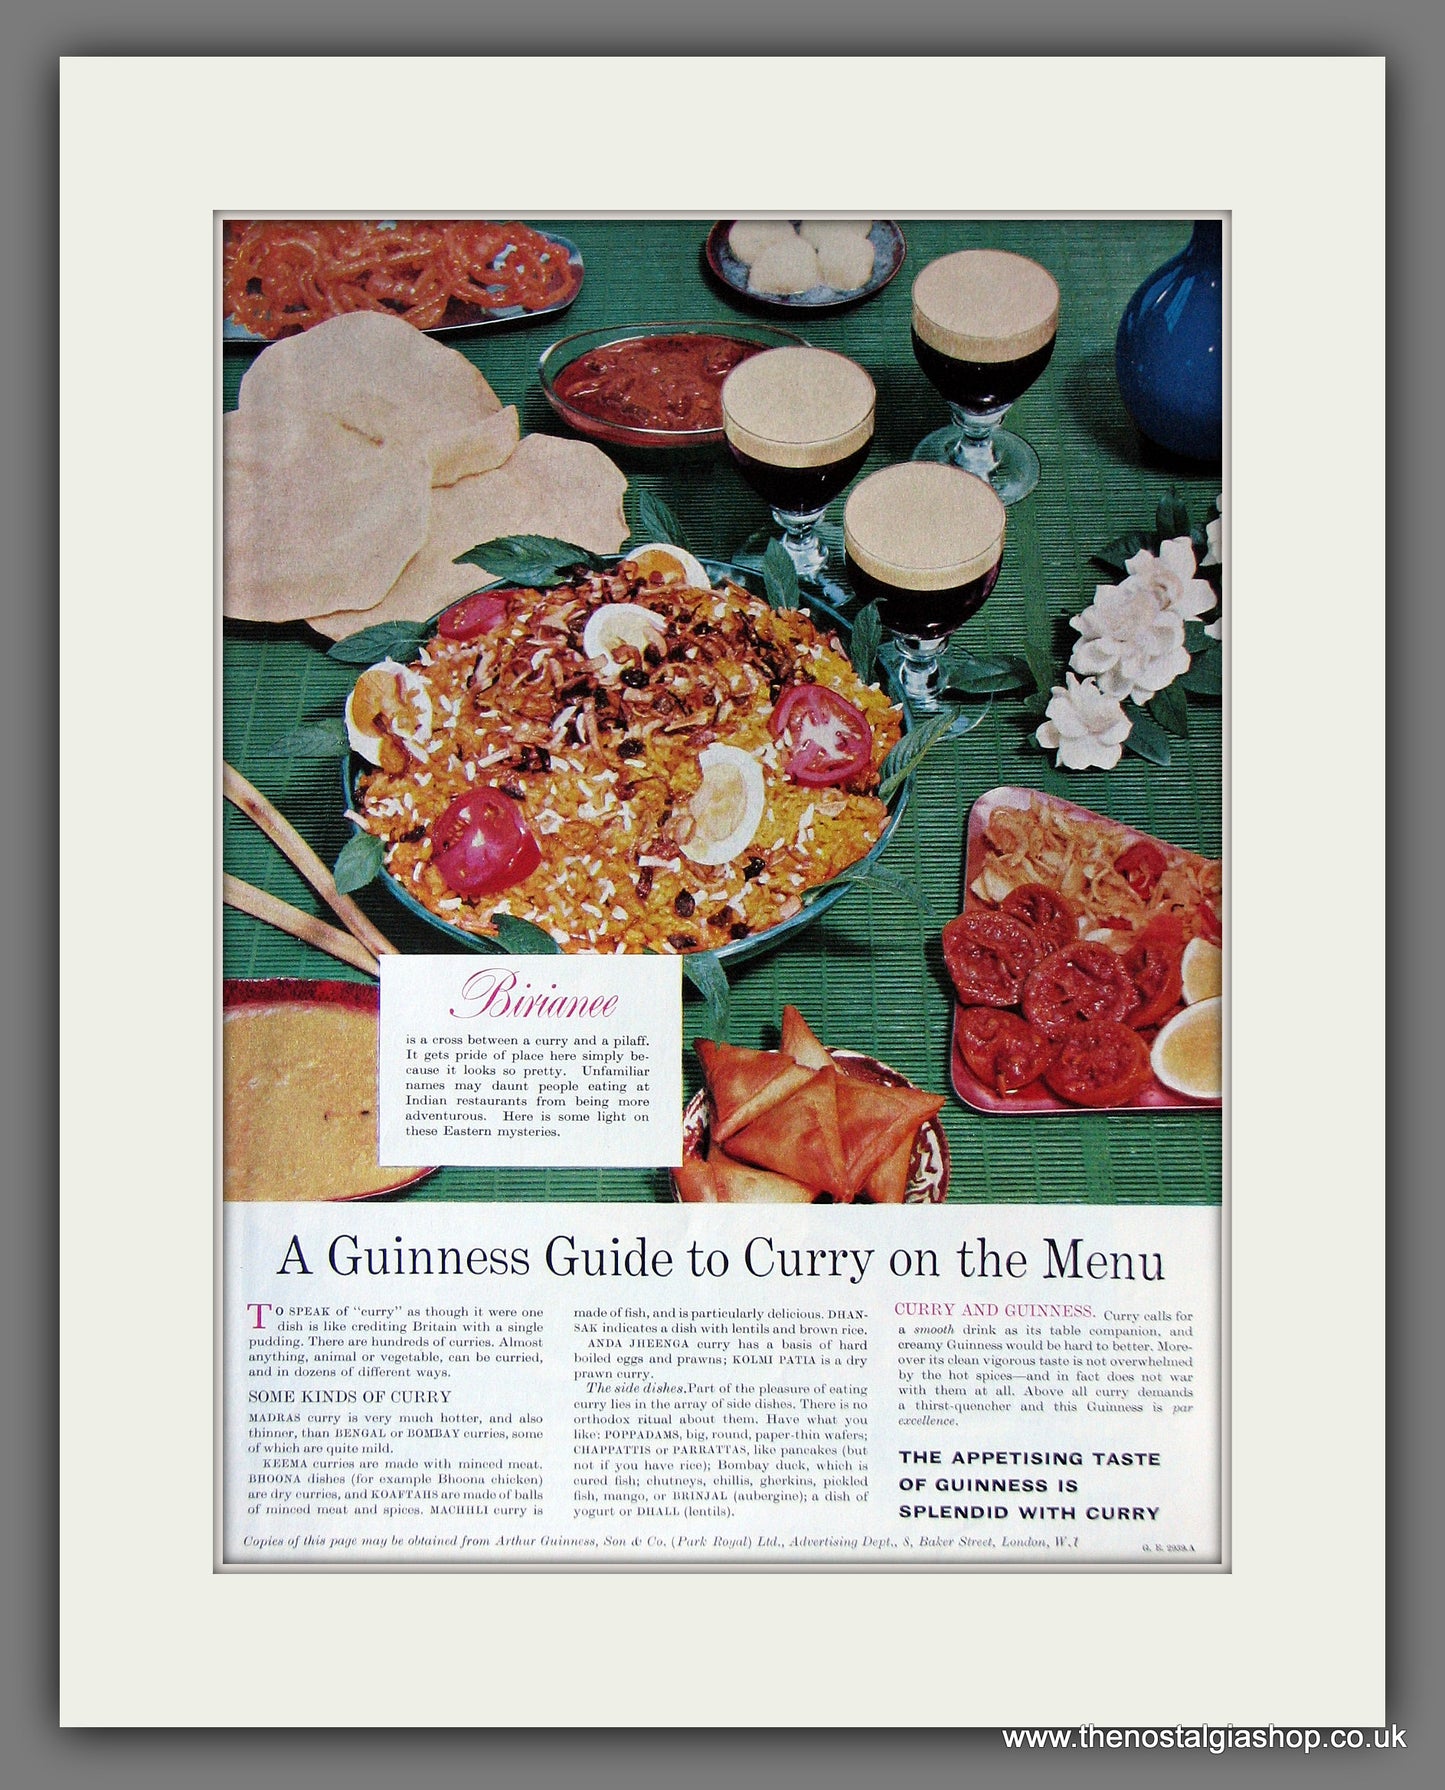 Guinness with Curry On The Menu. 1958 Original Advert  (ref AD56340)